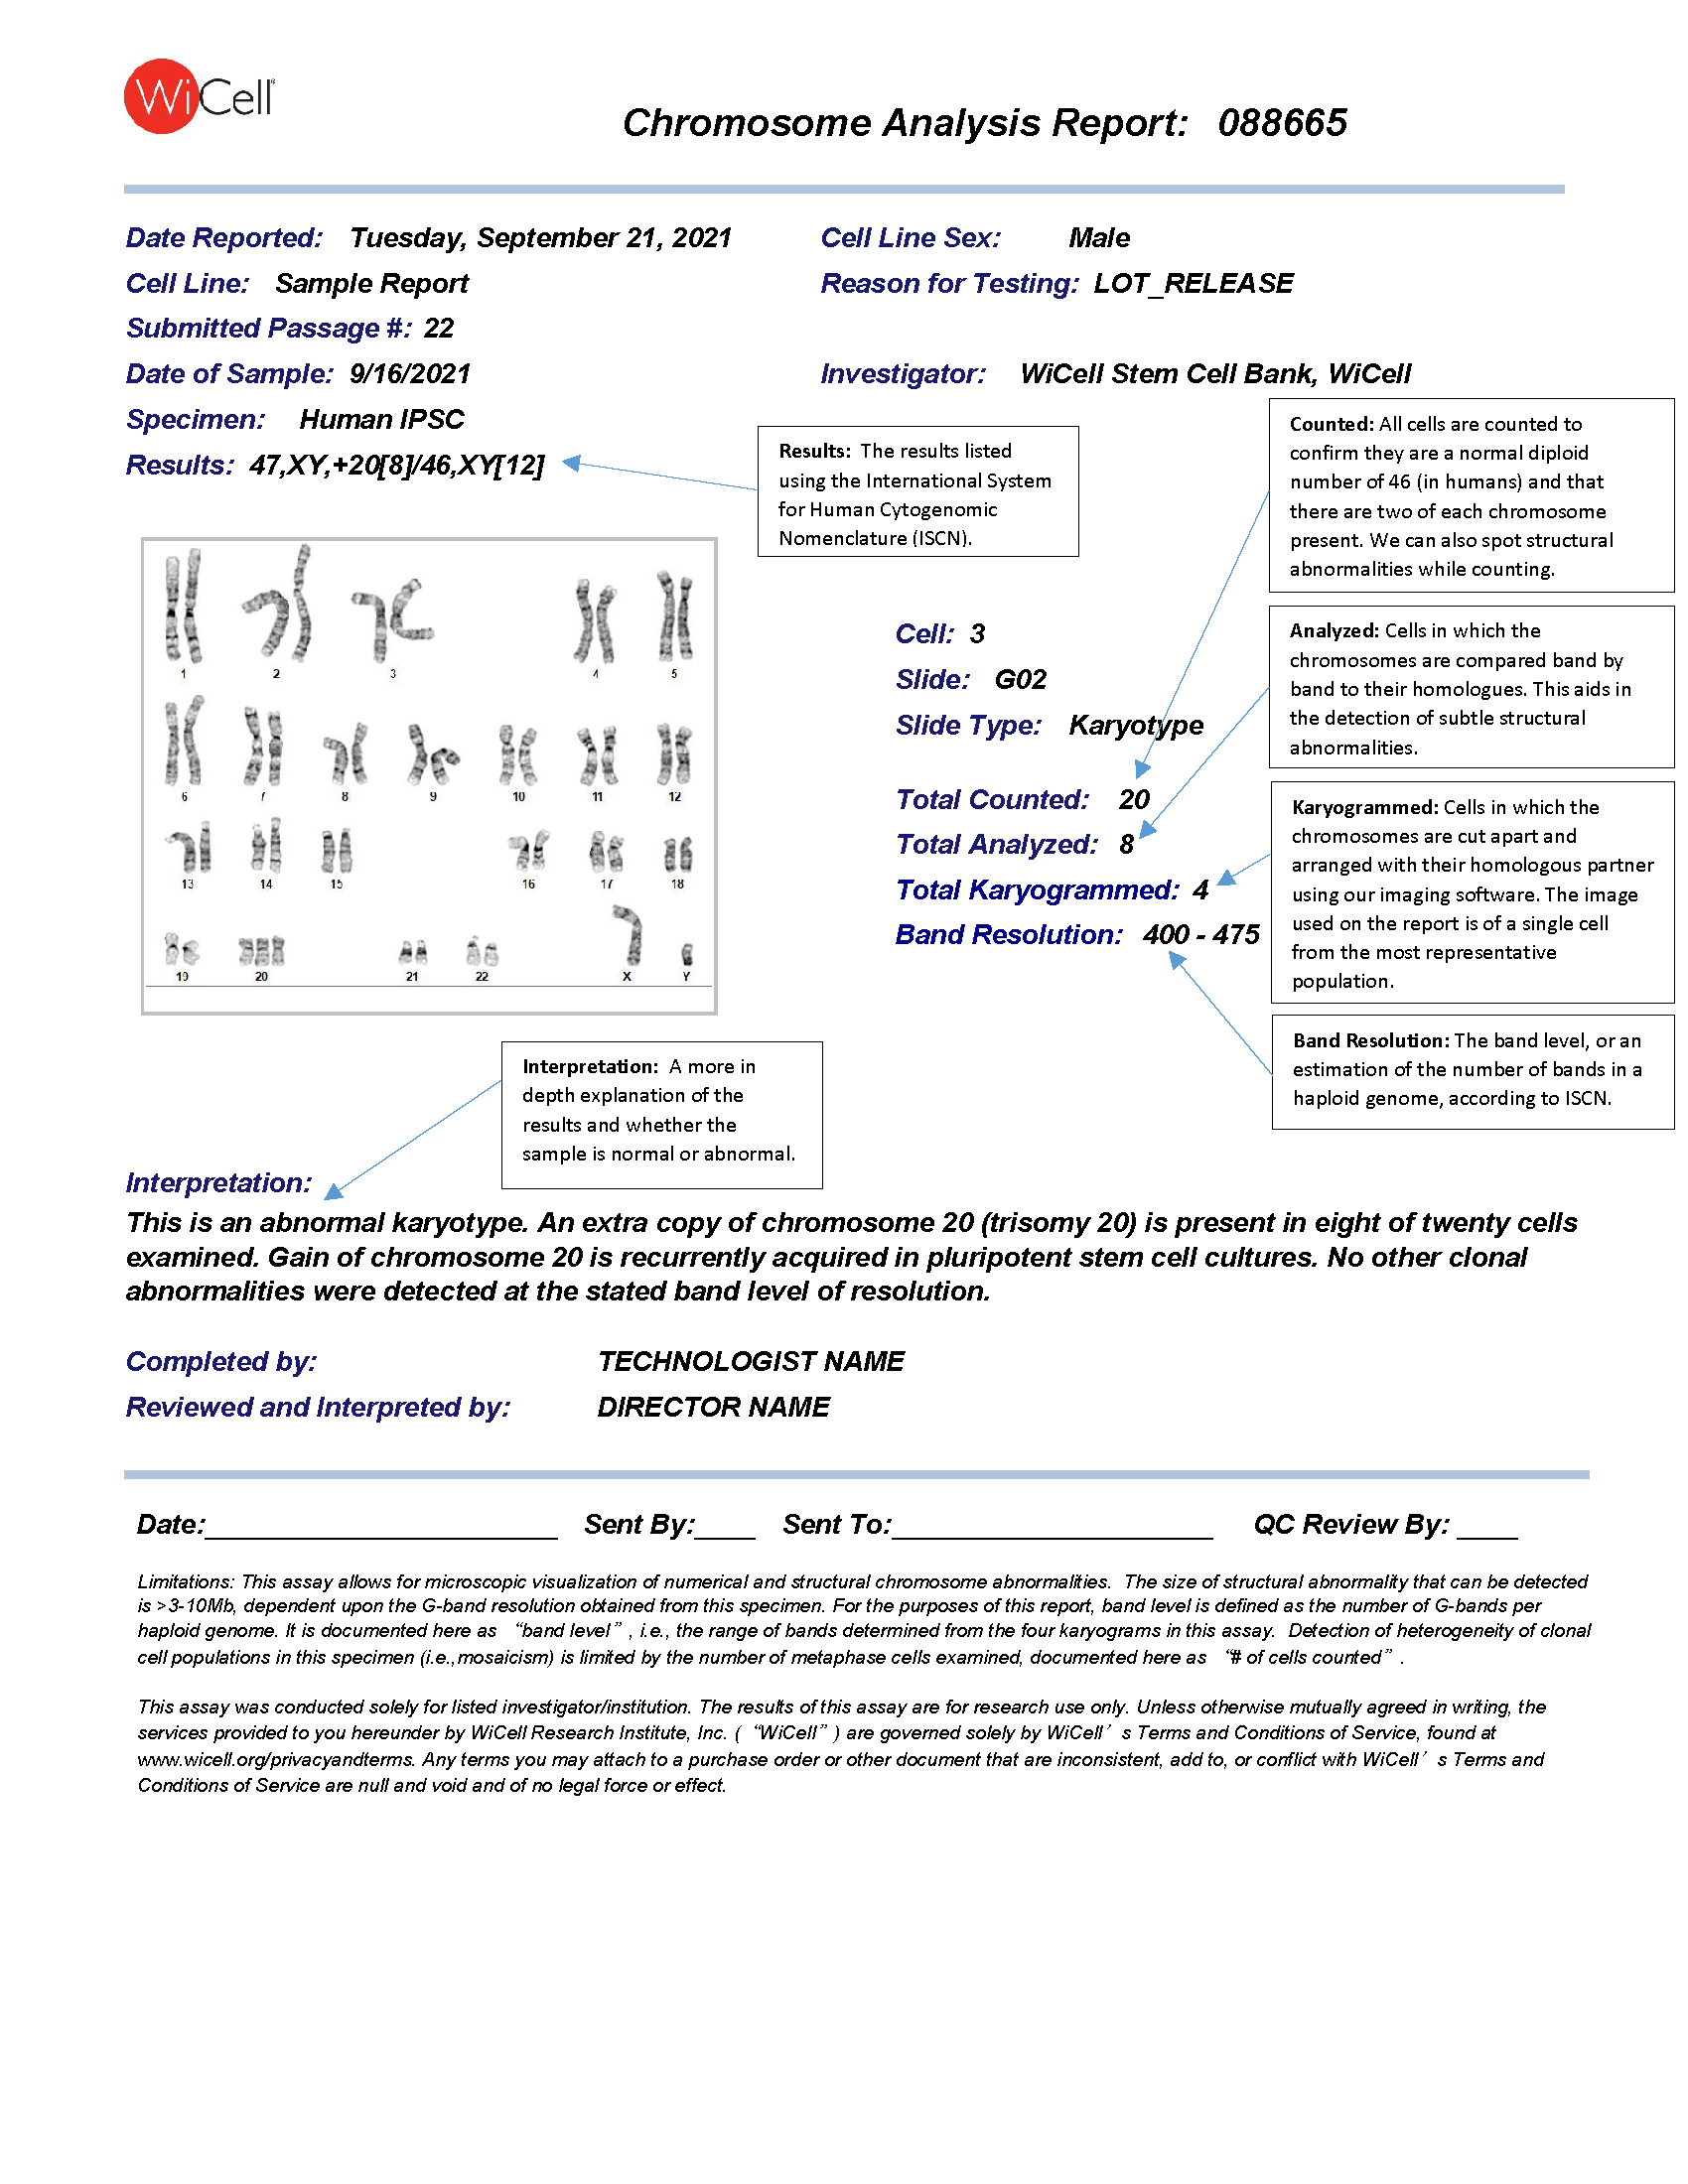 Interpreting Your Karyotype Results Wicell